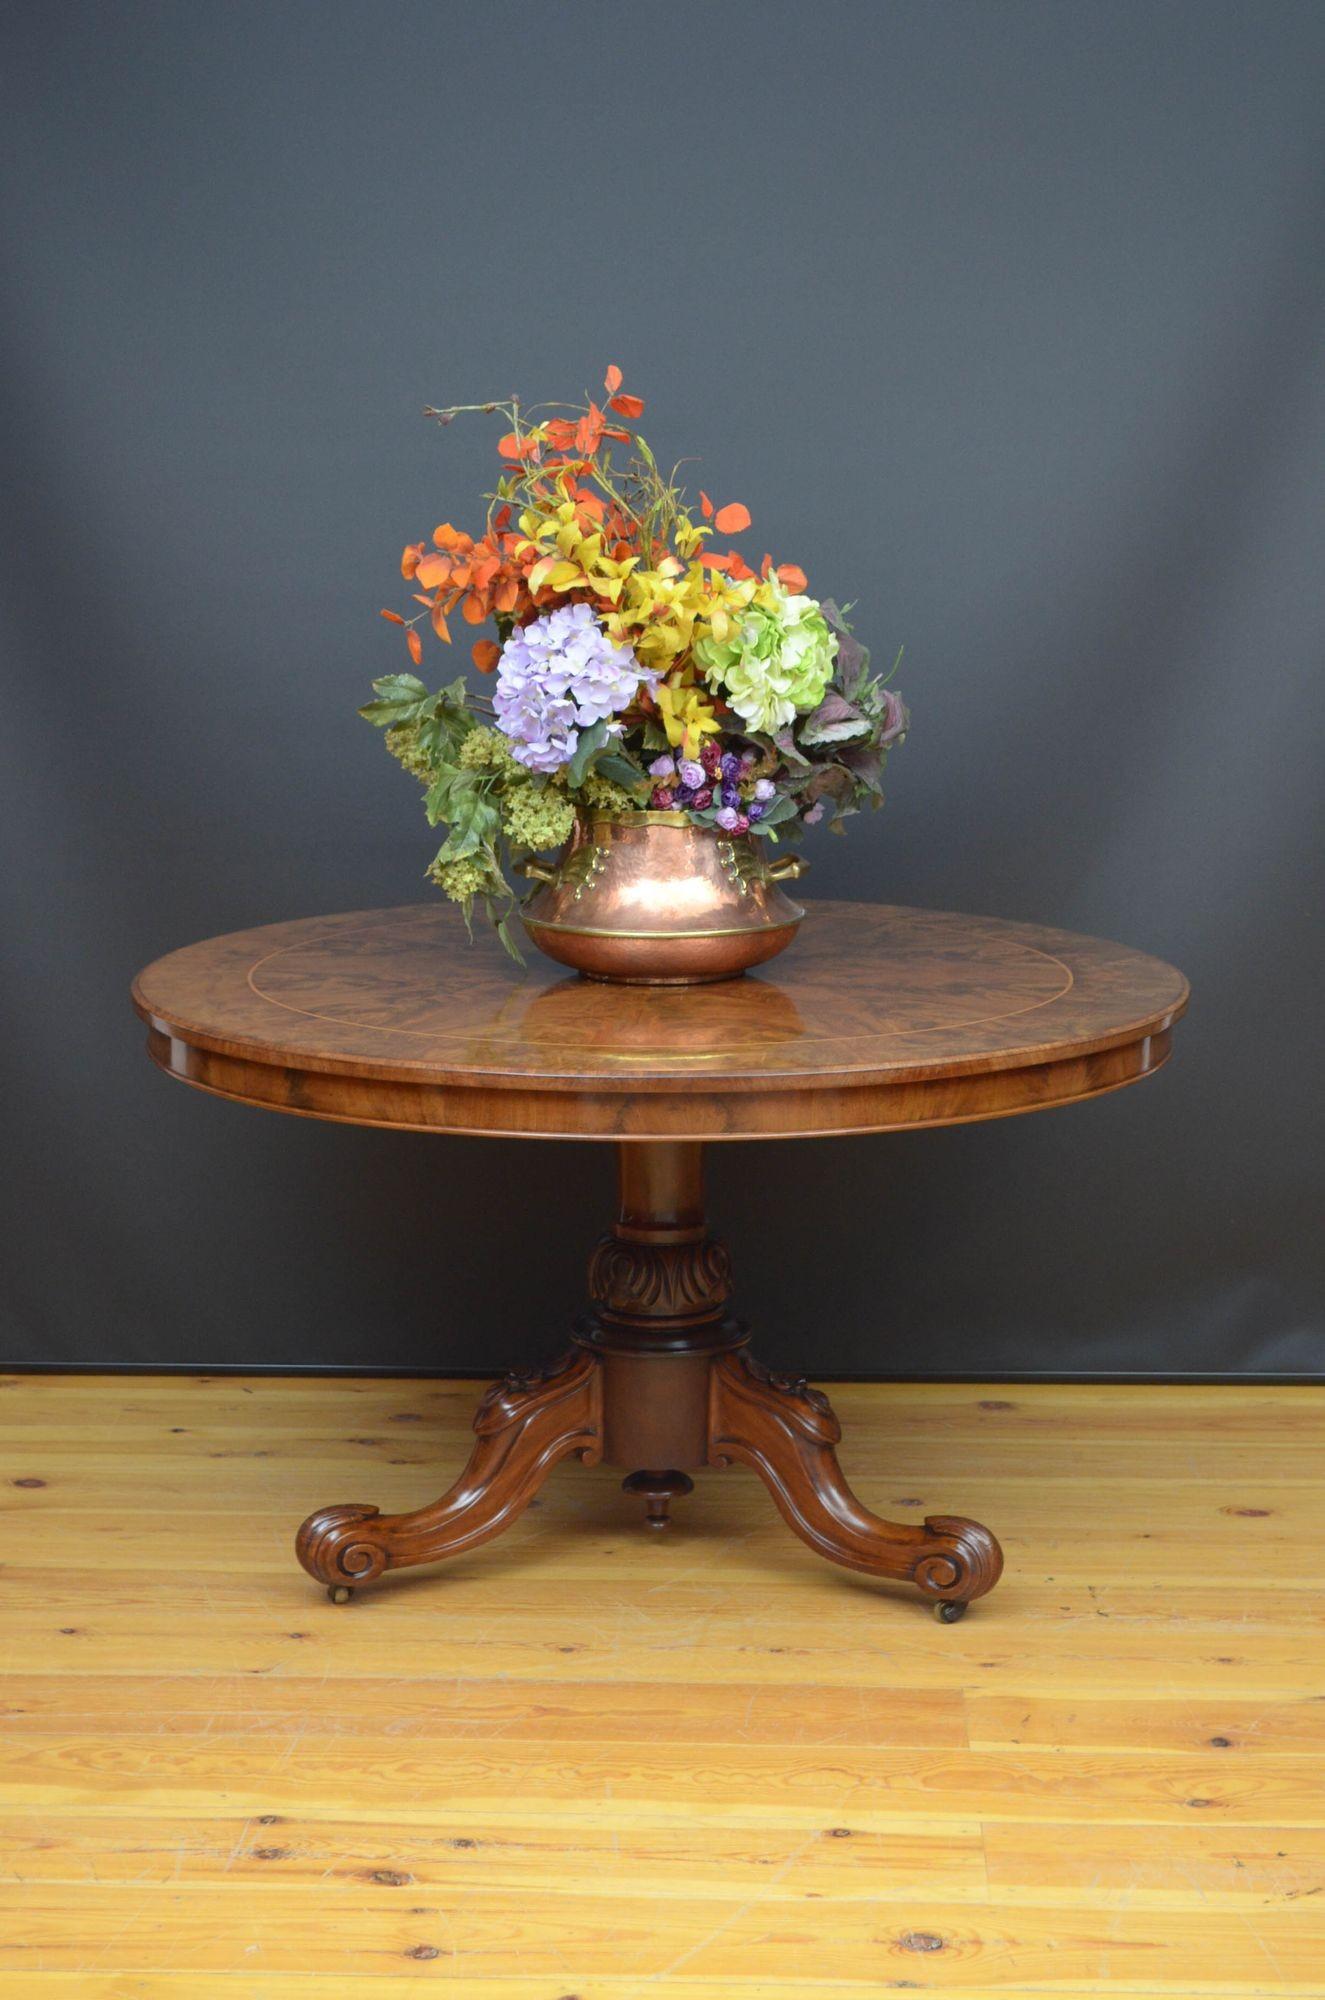 Sn5378 Outstanding Victorian tilt top table, having segmented flamed mahogany veneered top with decorative string inlay, raised on finely carved column terminating in three carved cabriole legs and castors. This antique table is in home ready